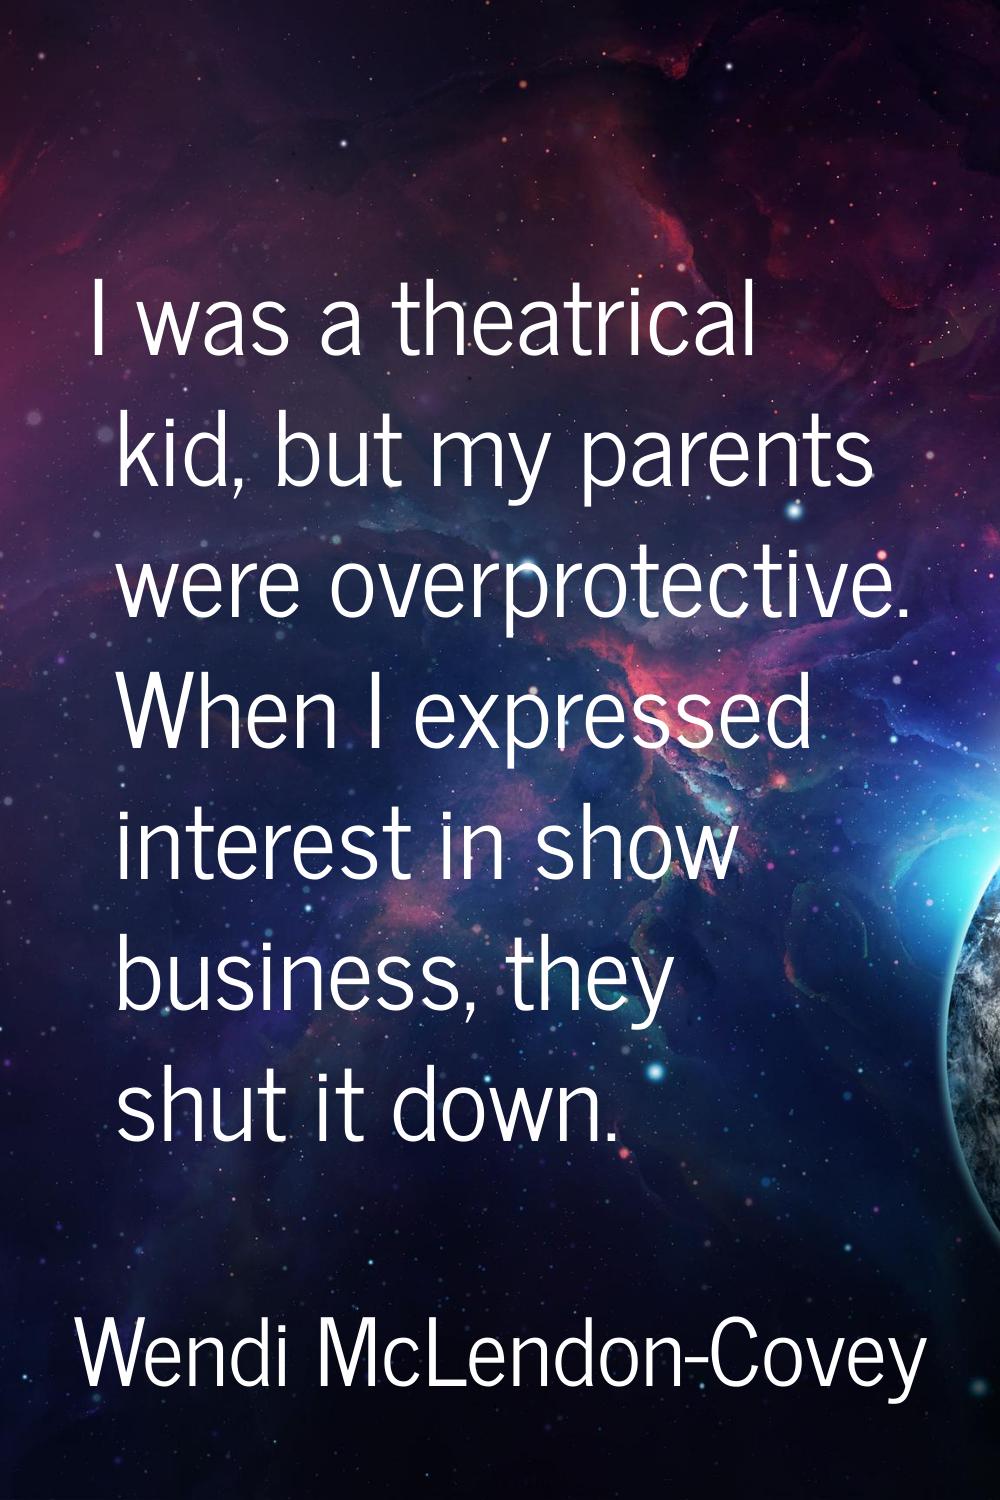 I was a theatrical kid, but my parents were overprotective. When I expressed interest in show busin